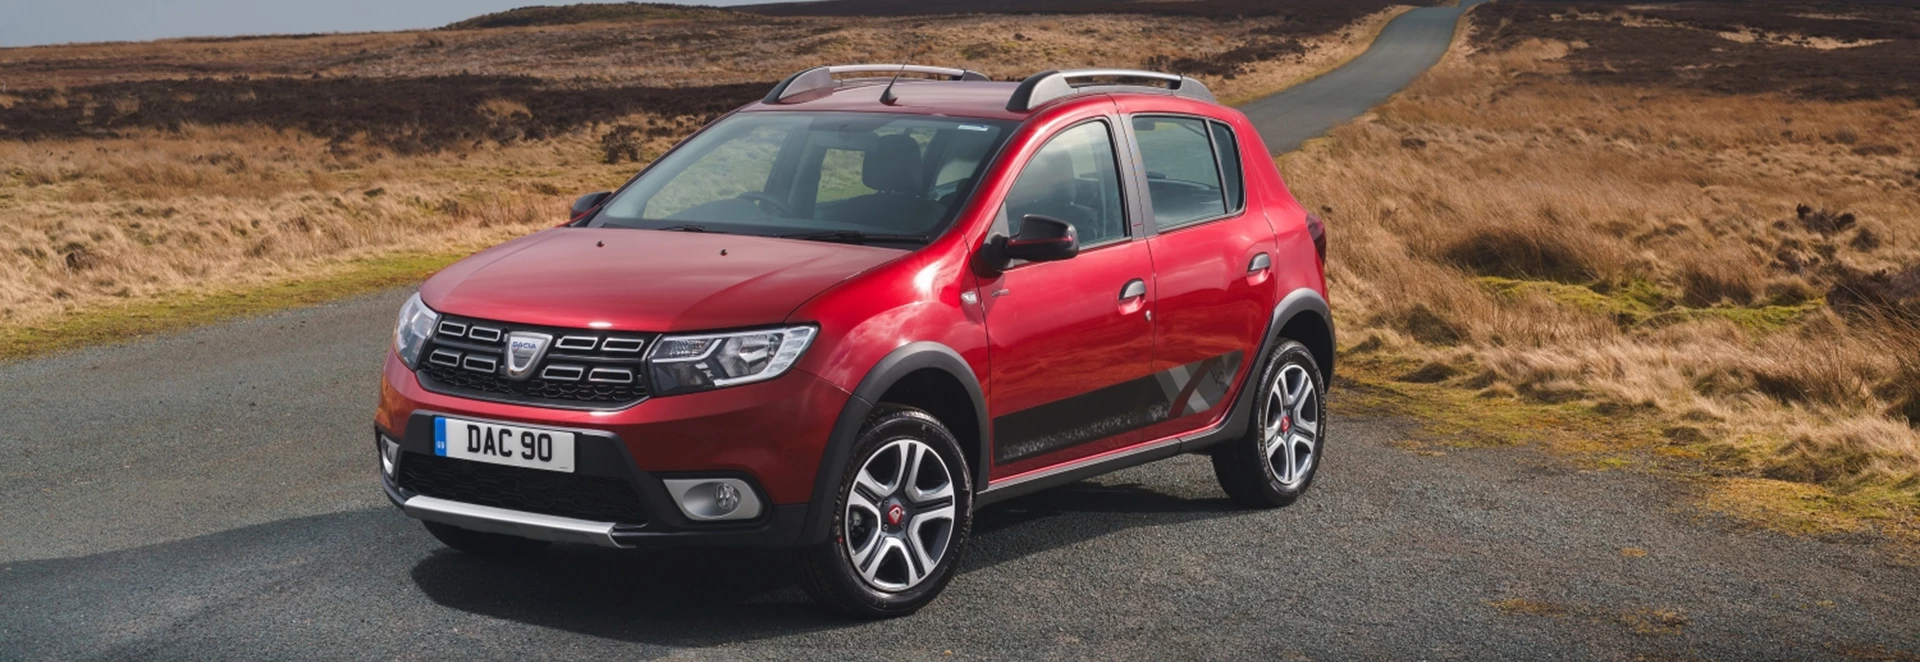 What to expect from the 2021 Dacia Sandero